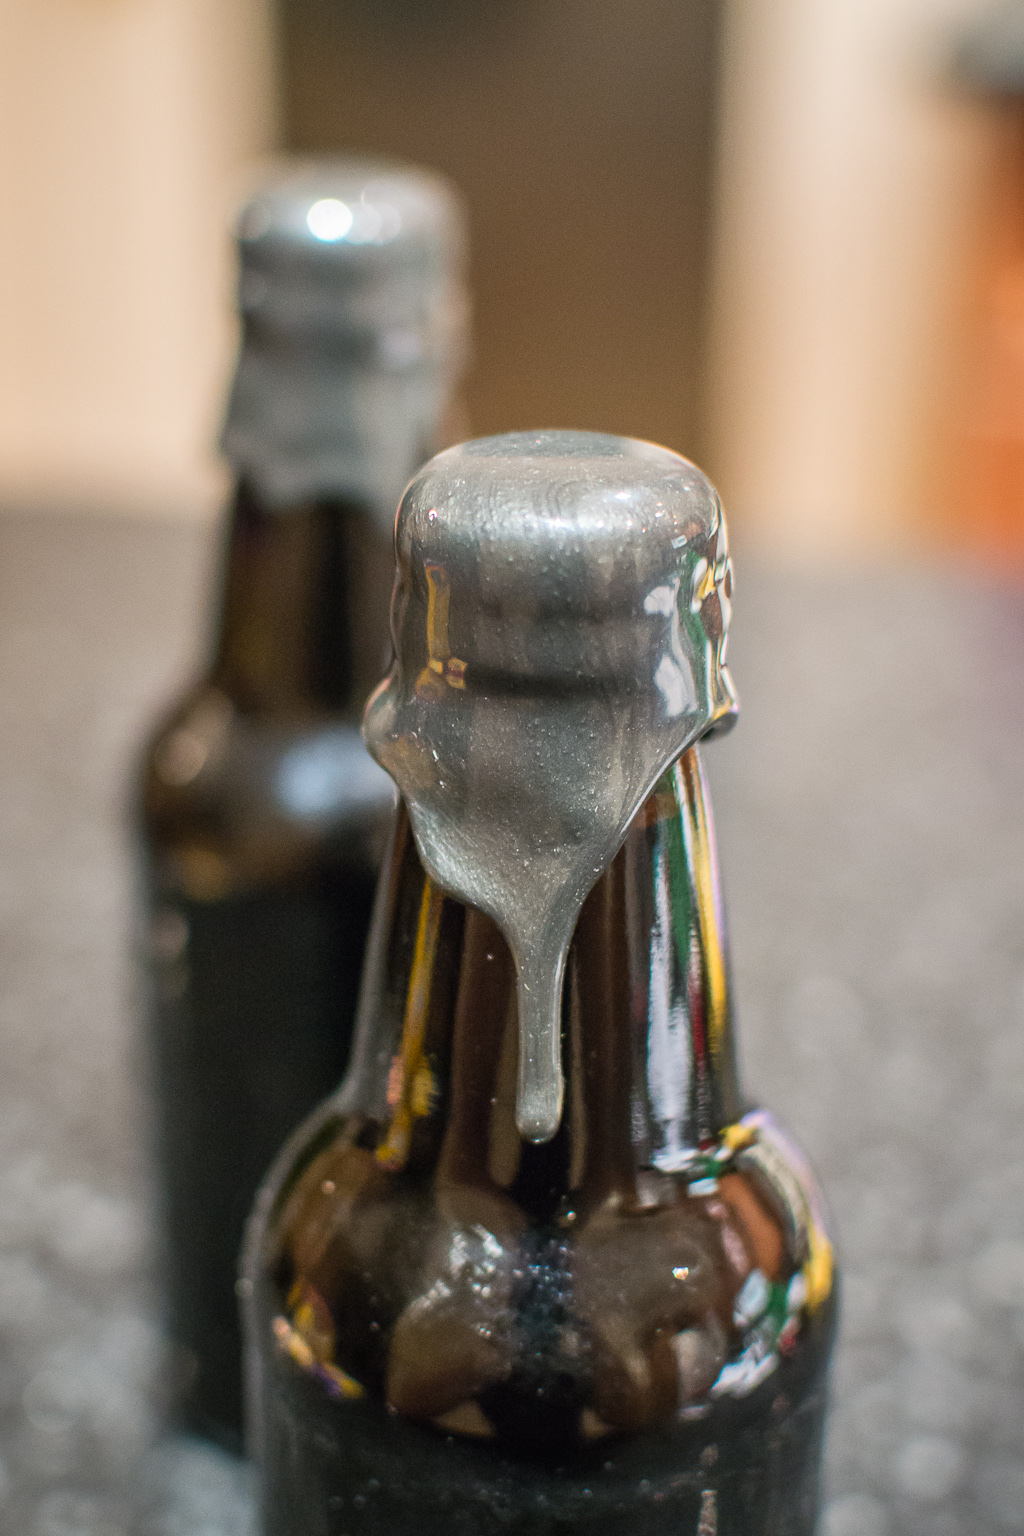 How To Use Bottle Sealing Wax - Wine Making and Beer Brewing Blog